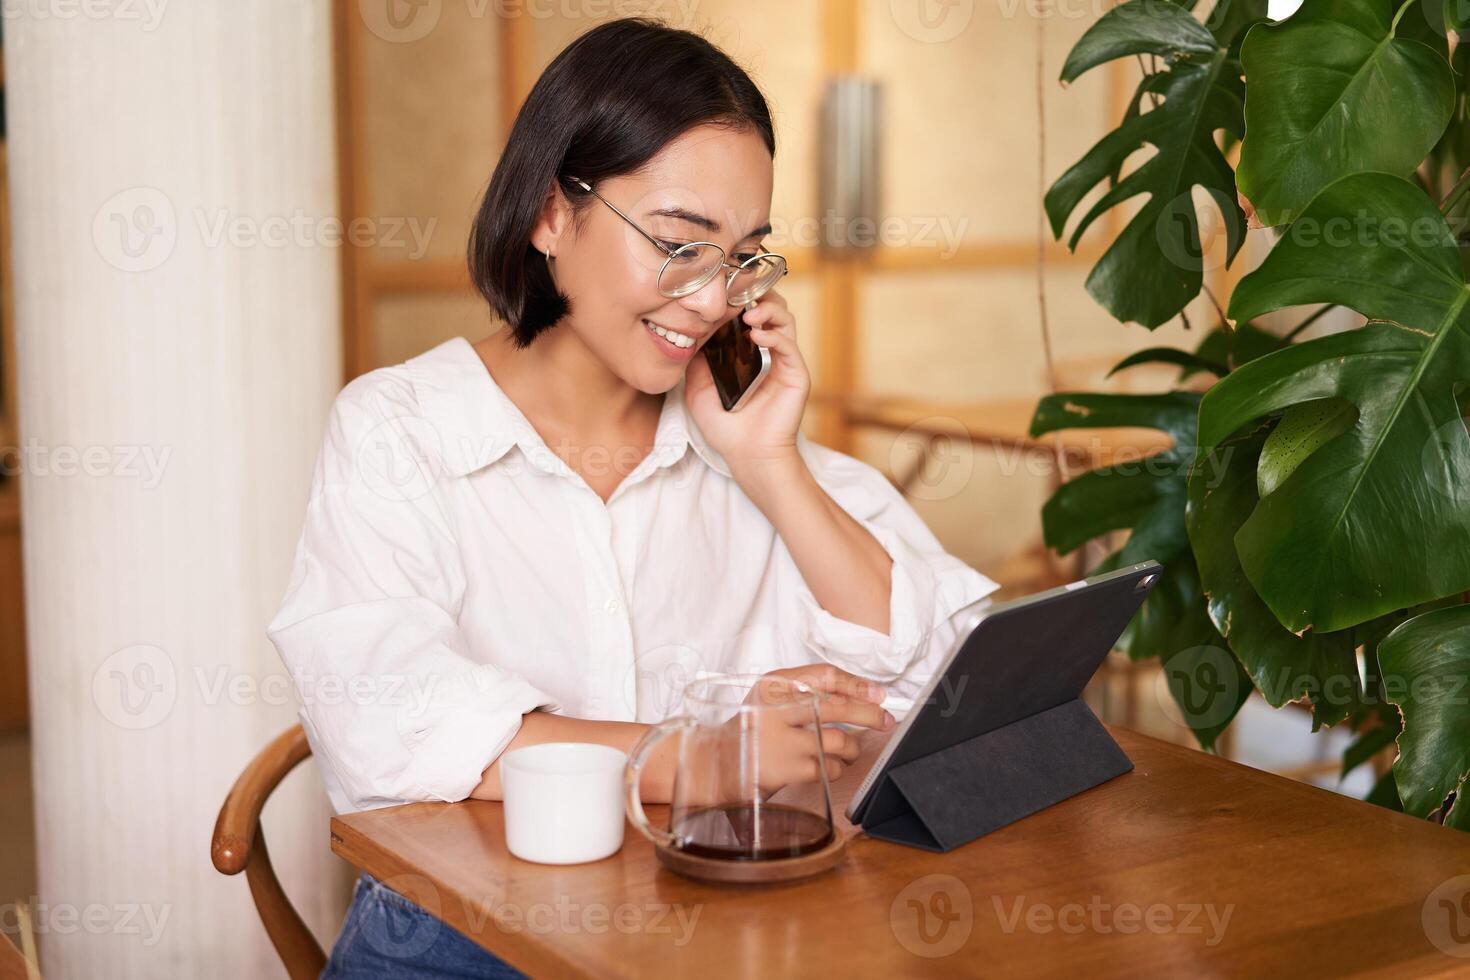 Woman in glasses, answer phone call in a cafe, drinking coffee, looking at work on tablet, working on remote from restaurant photo